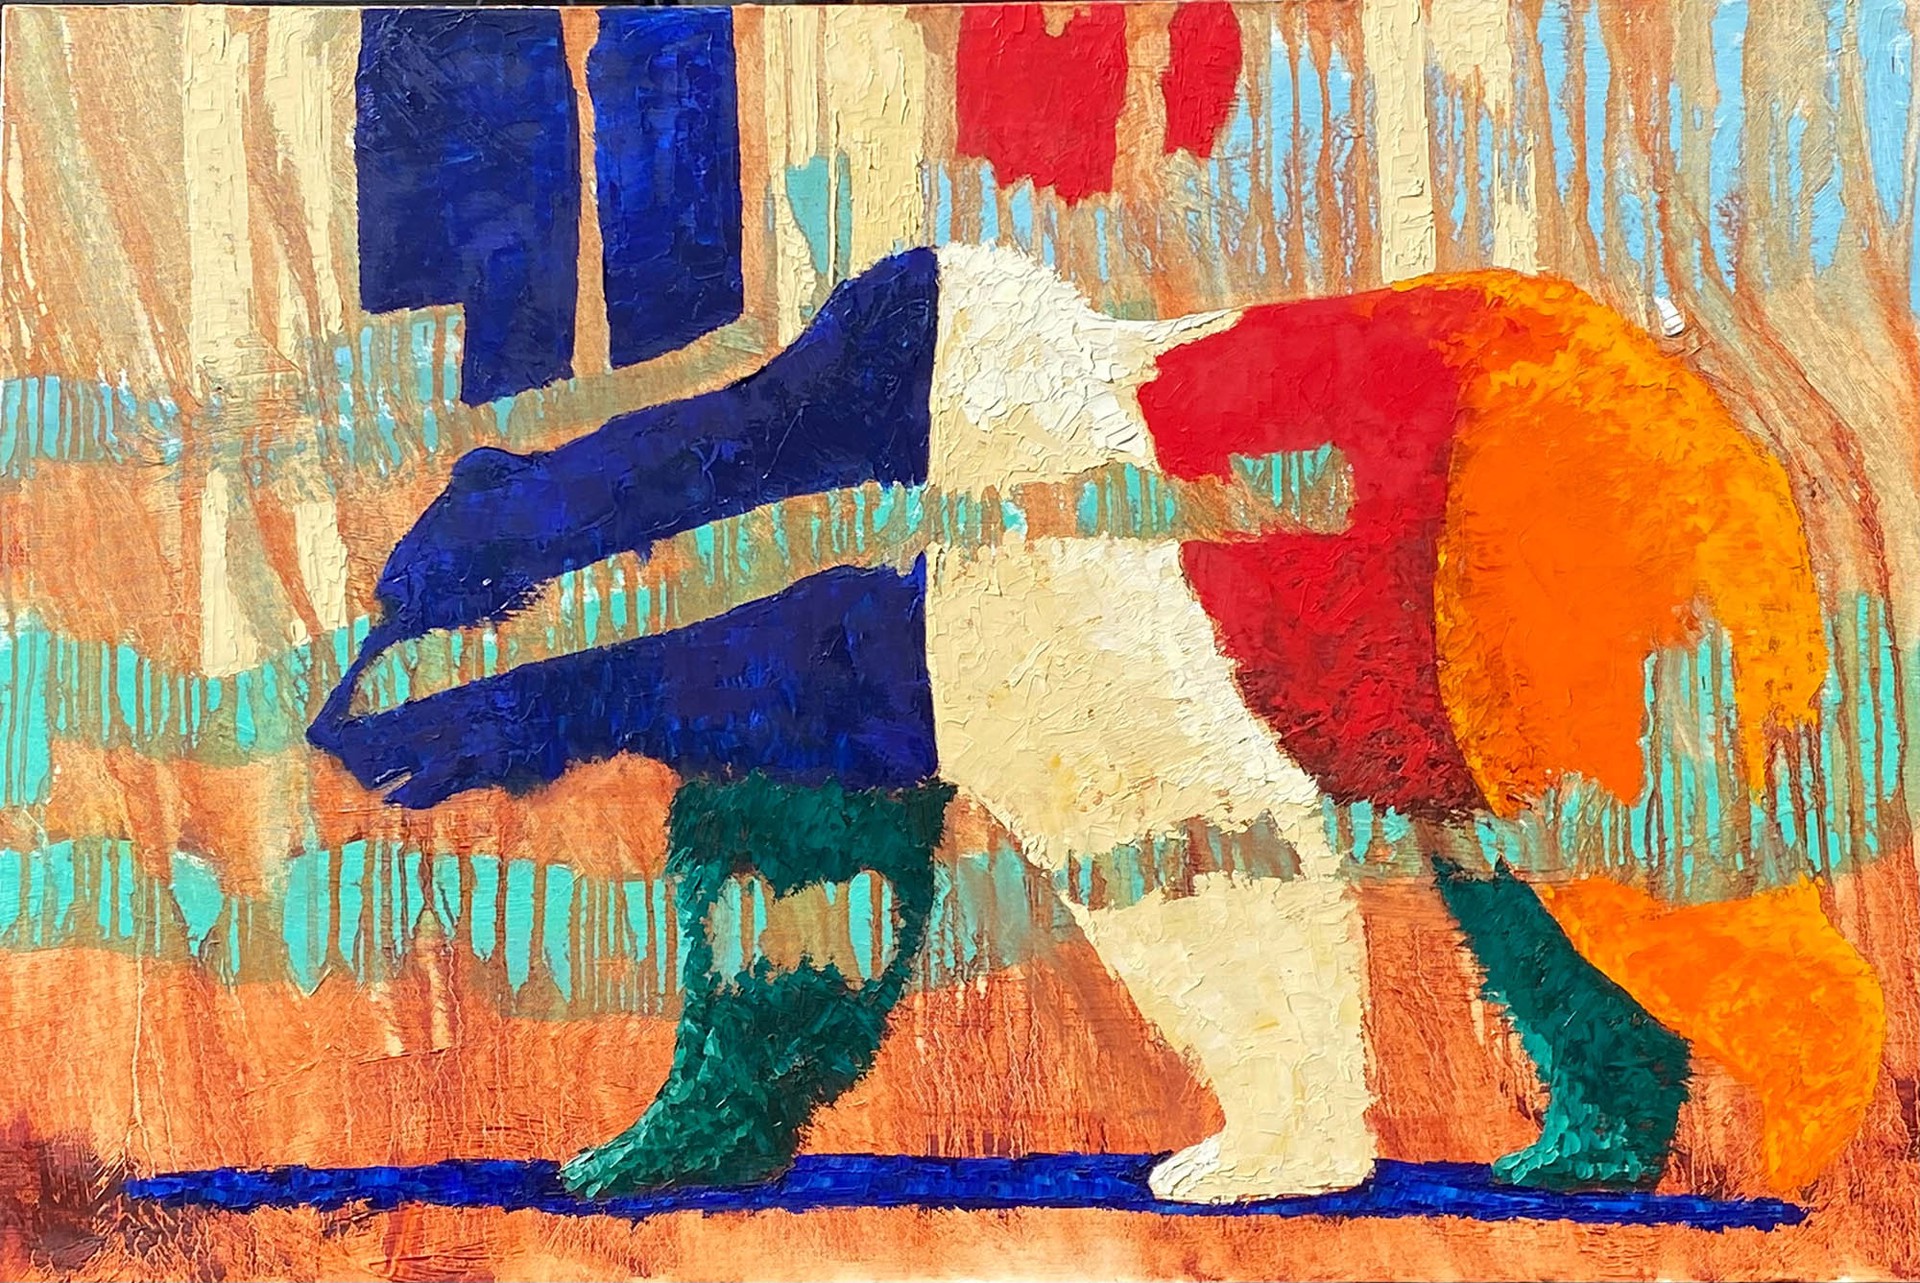 Original Oil Painting Featuring A Walking Bear Silhouette In Color Blocking Merging With Abstract Background